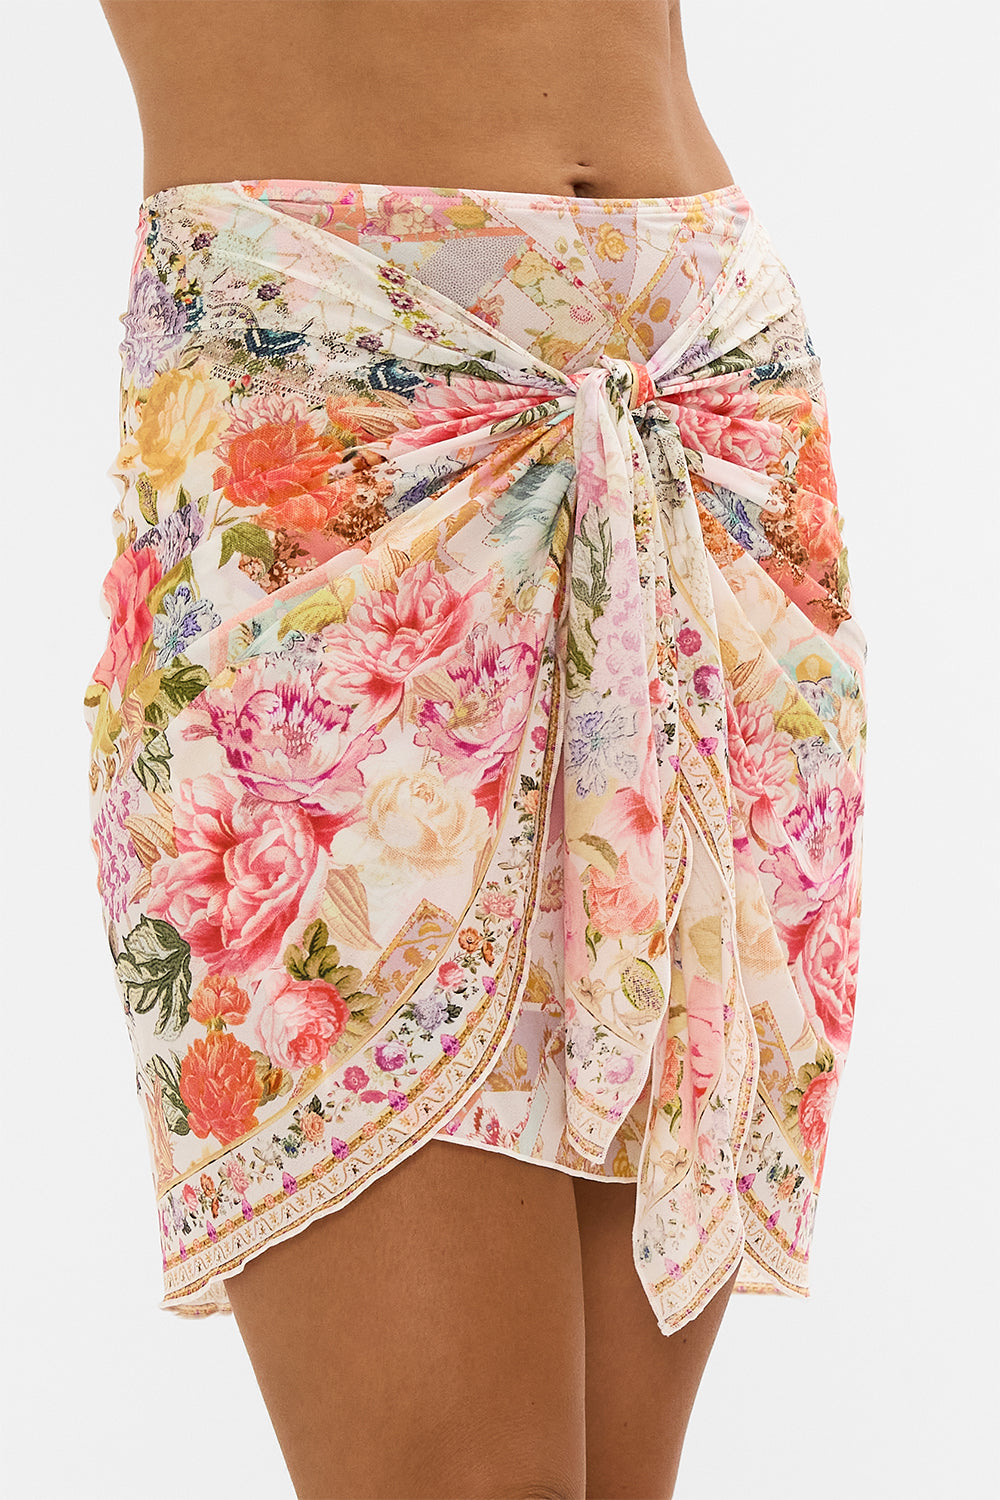 CAMILLA floral layered short sarong with tie front in Sew Yesterday